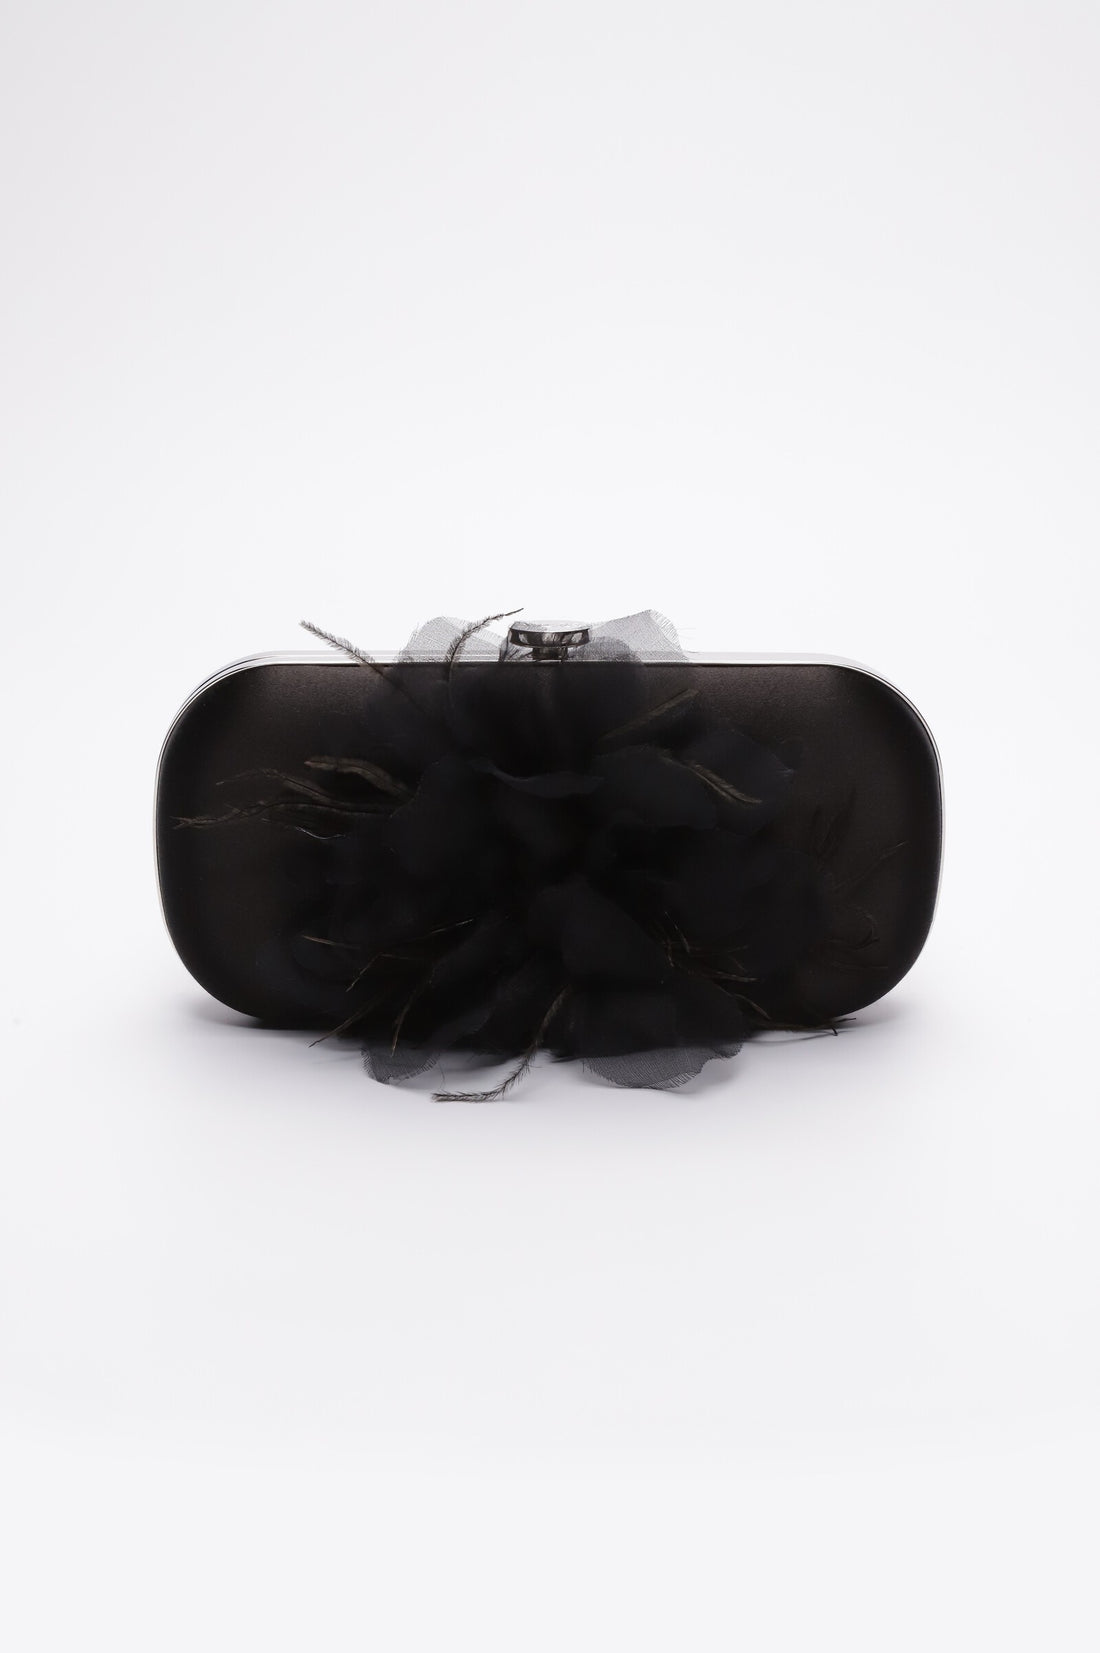 Front view of Bella Fiori Clutch in black satin with black flower adored on front side.